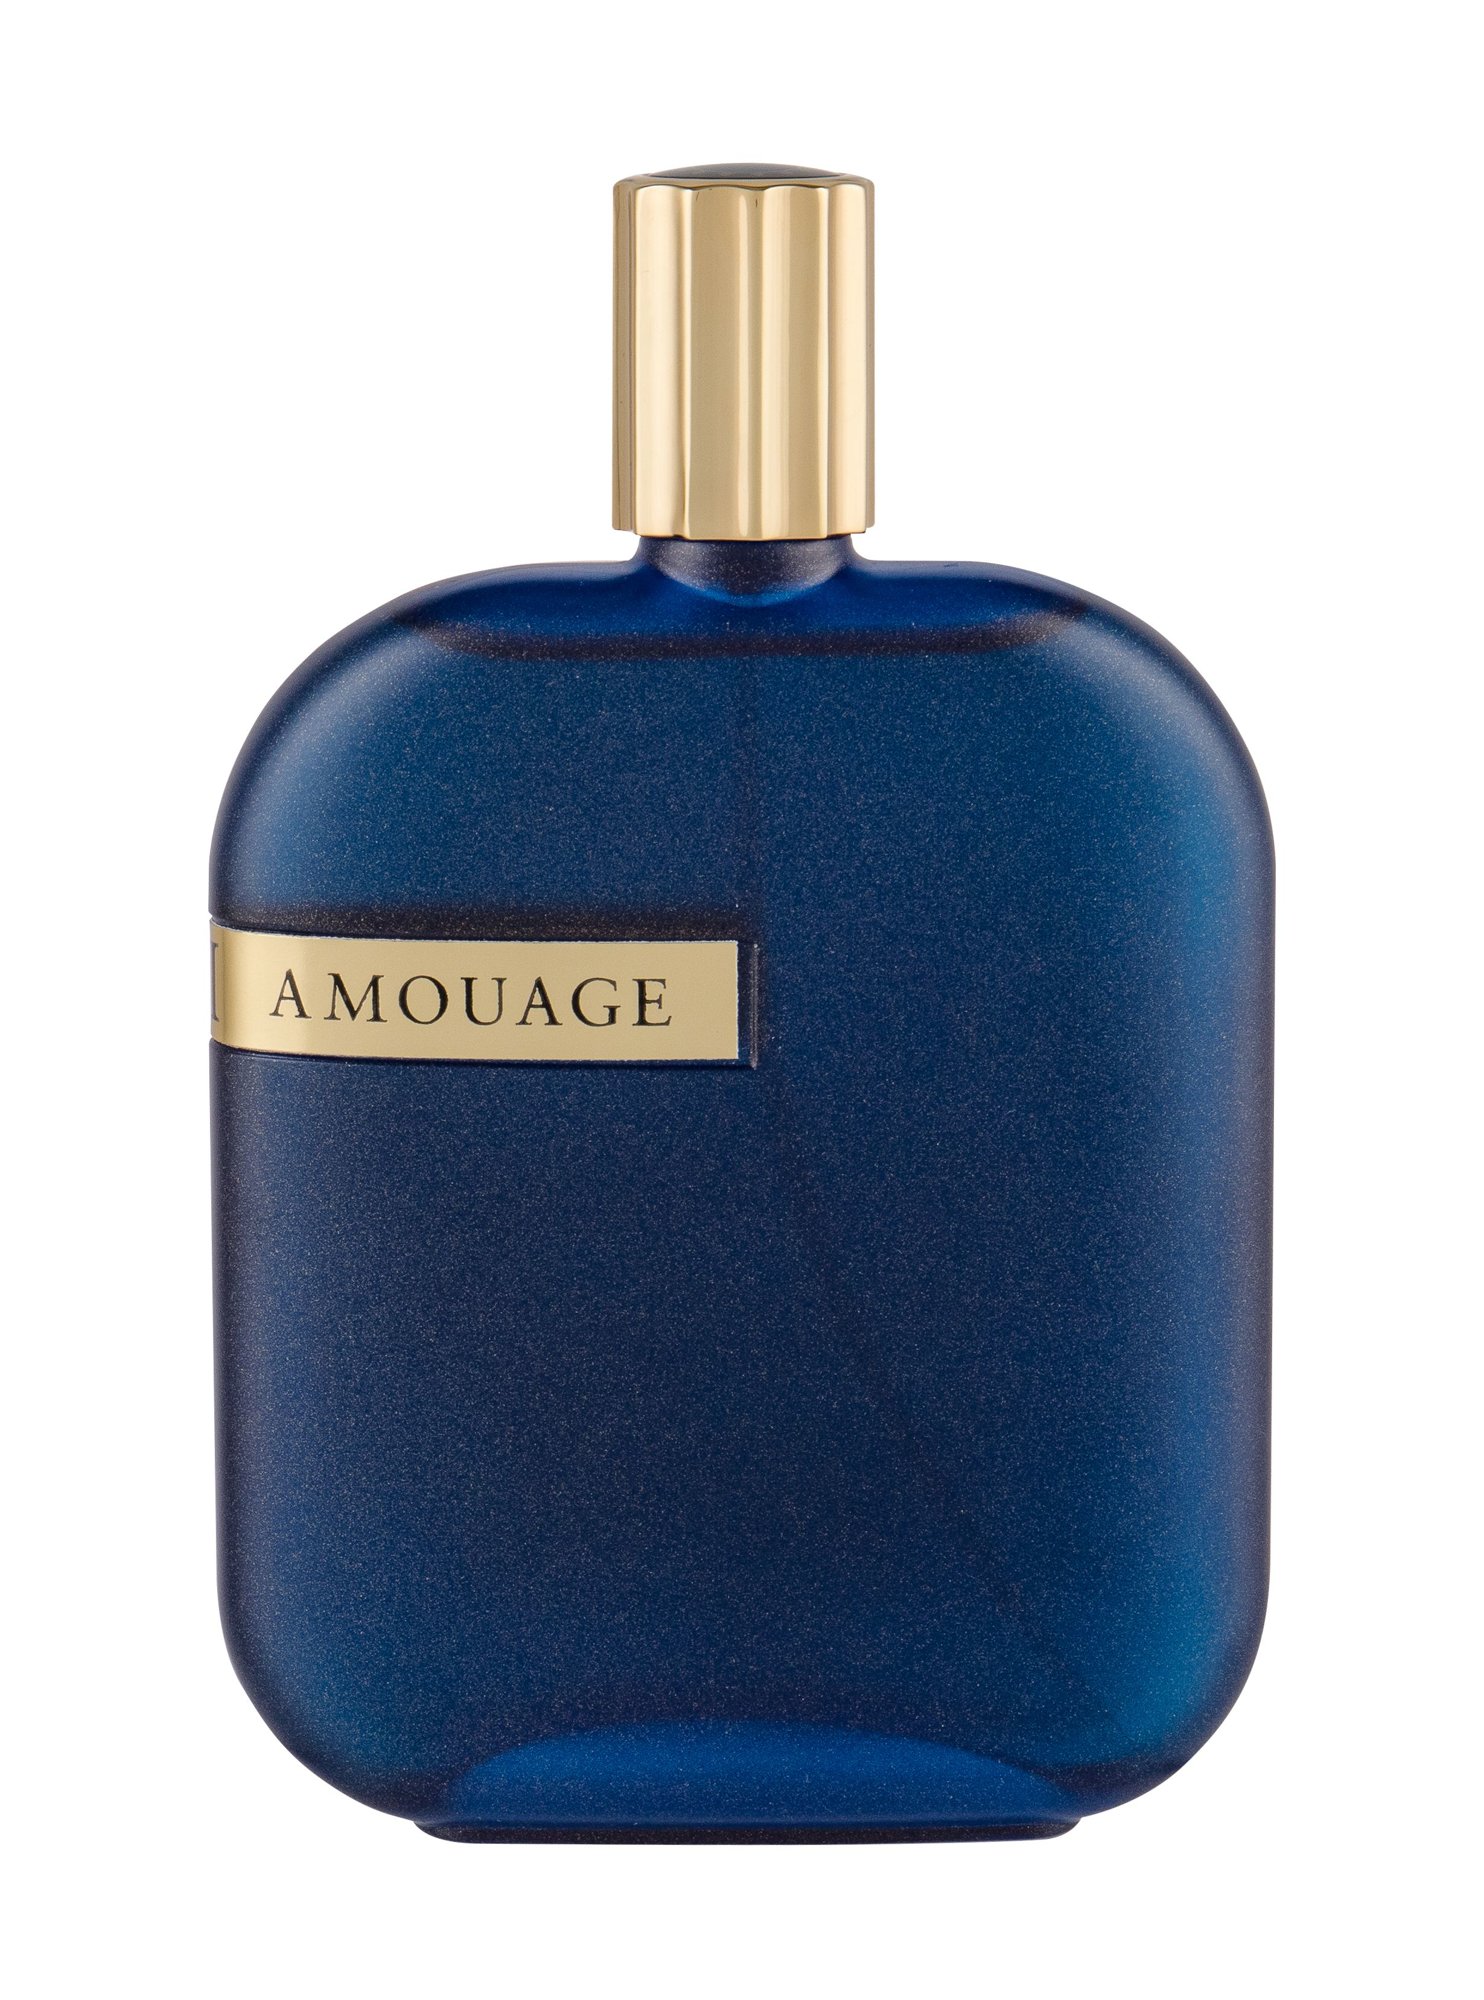 Amouage The Library Collection Opus